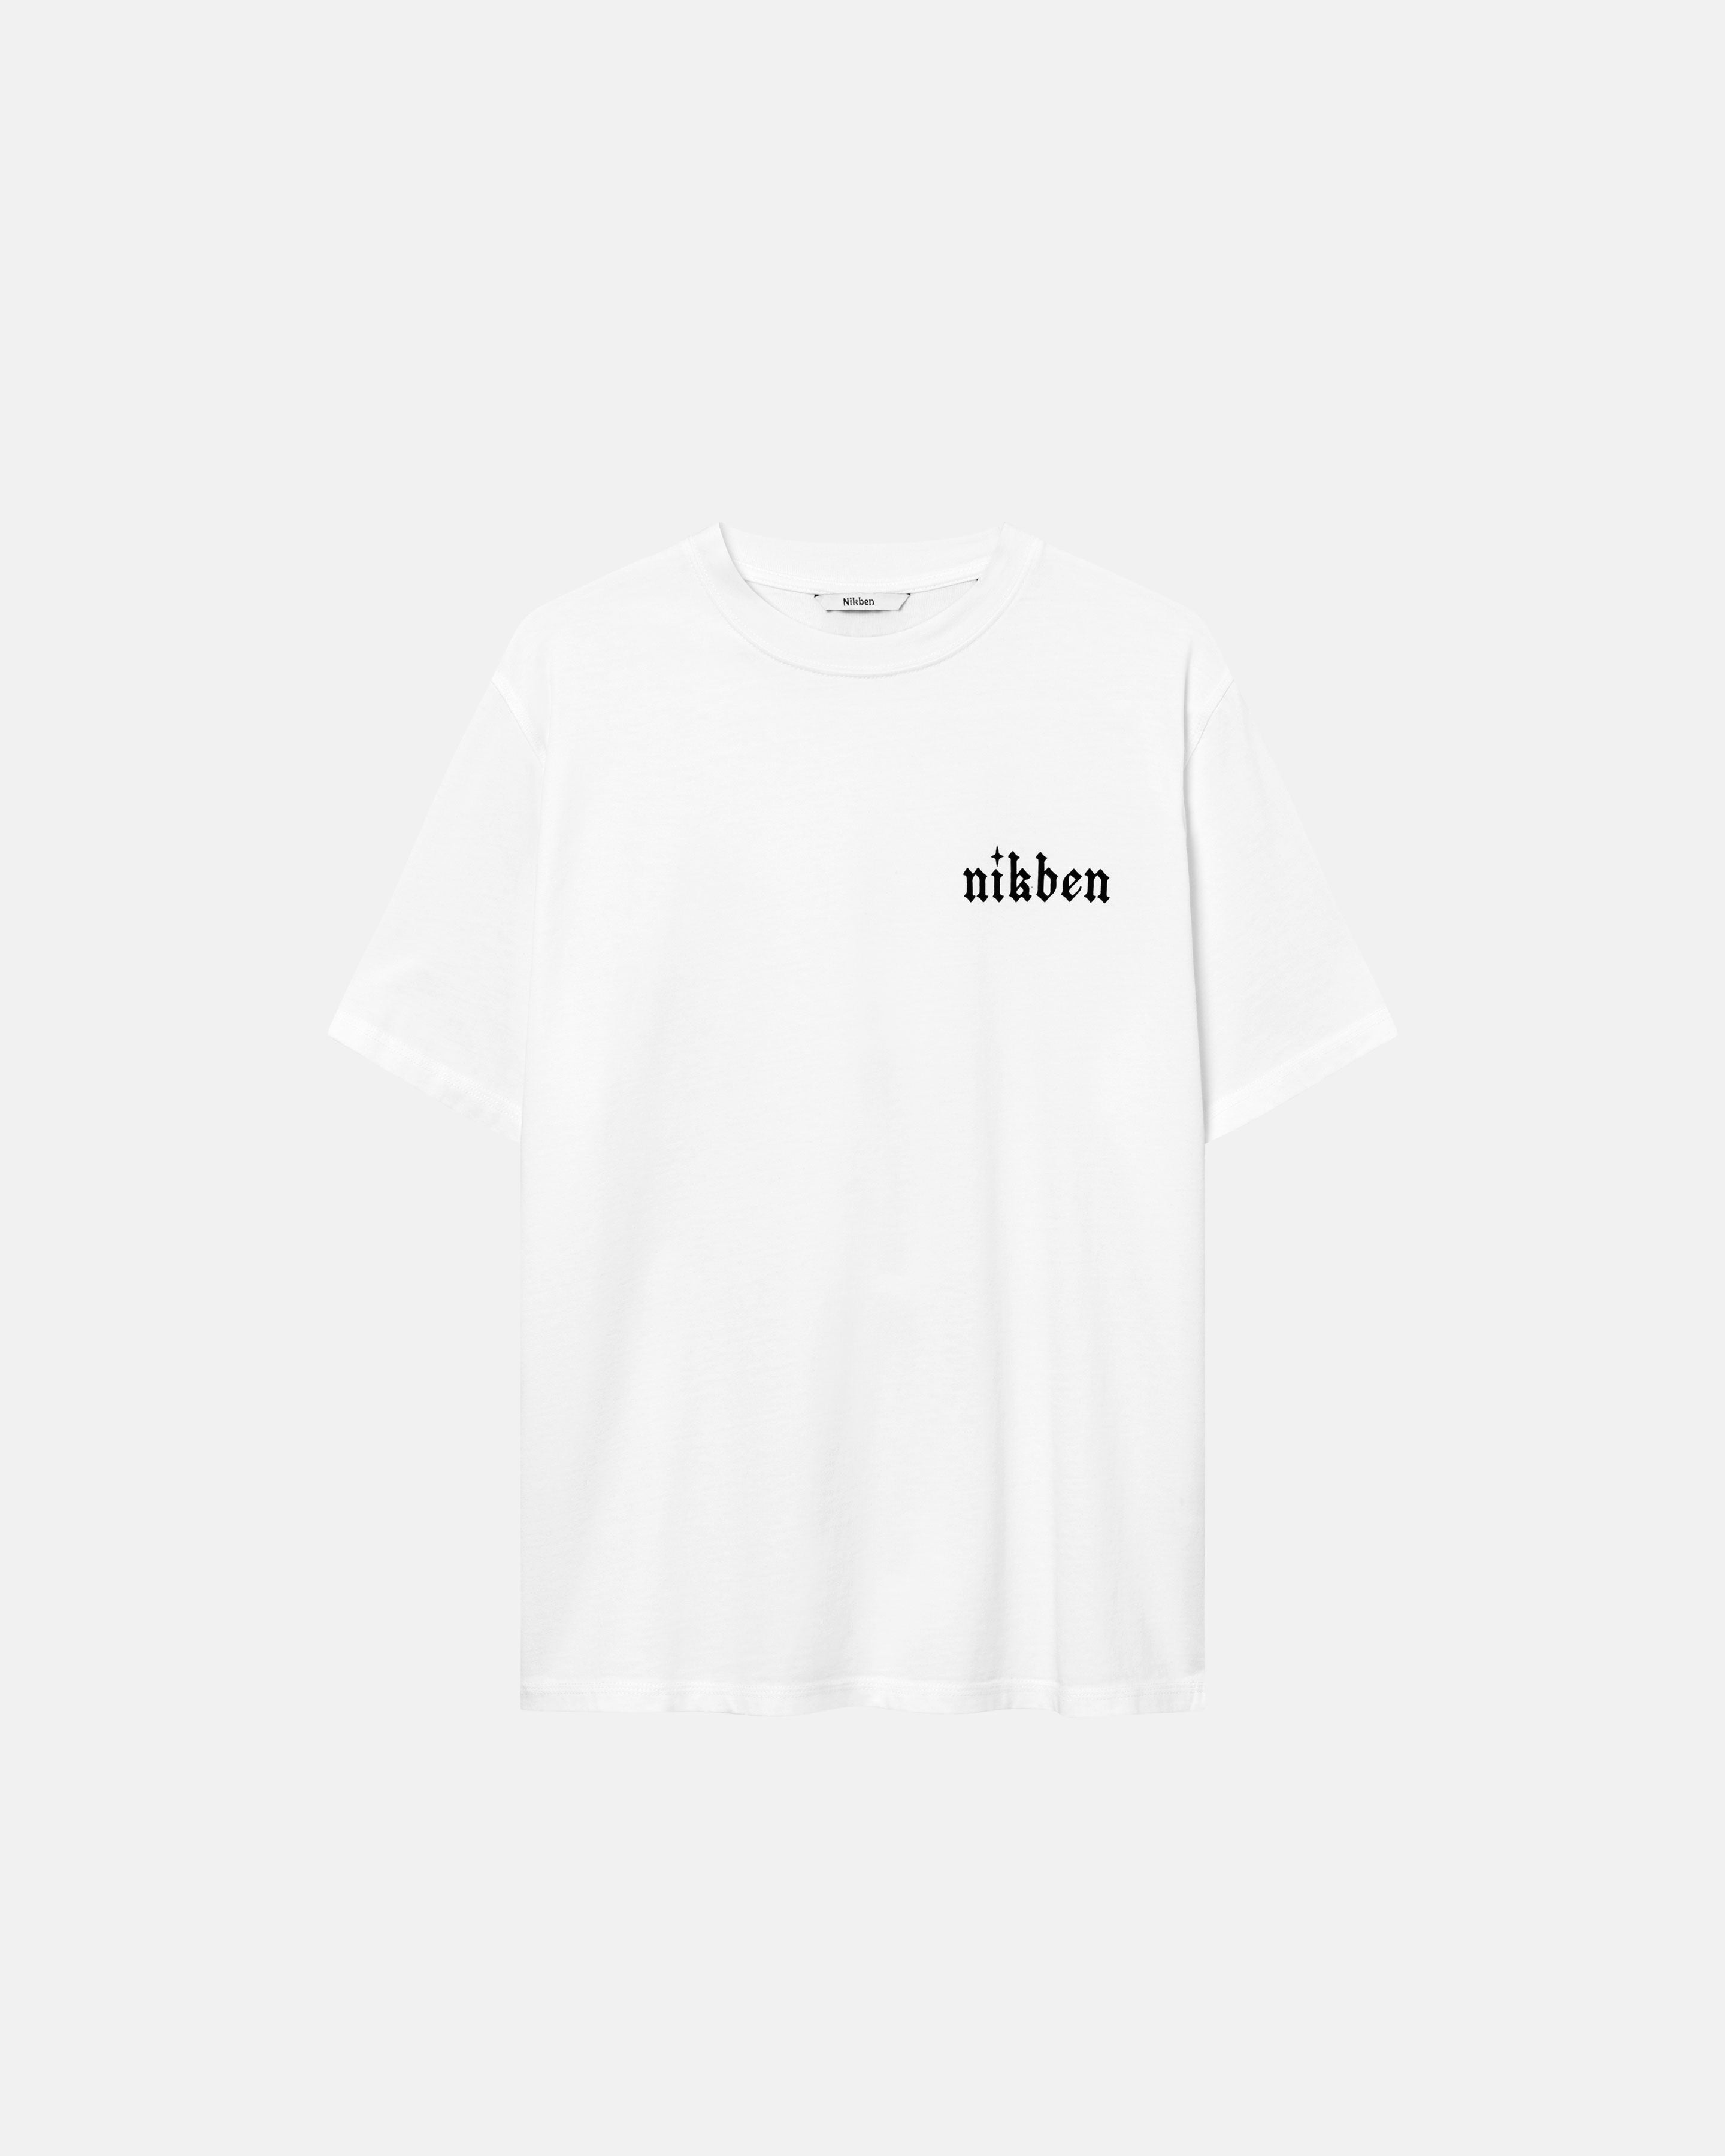 White t-shirt with a black Nikben logo on the chest